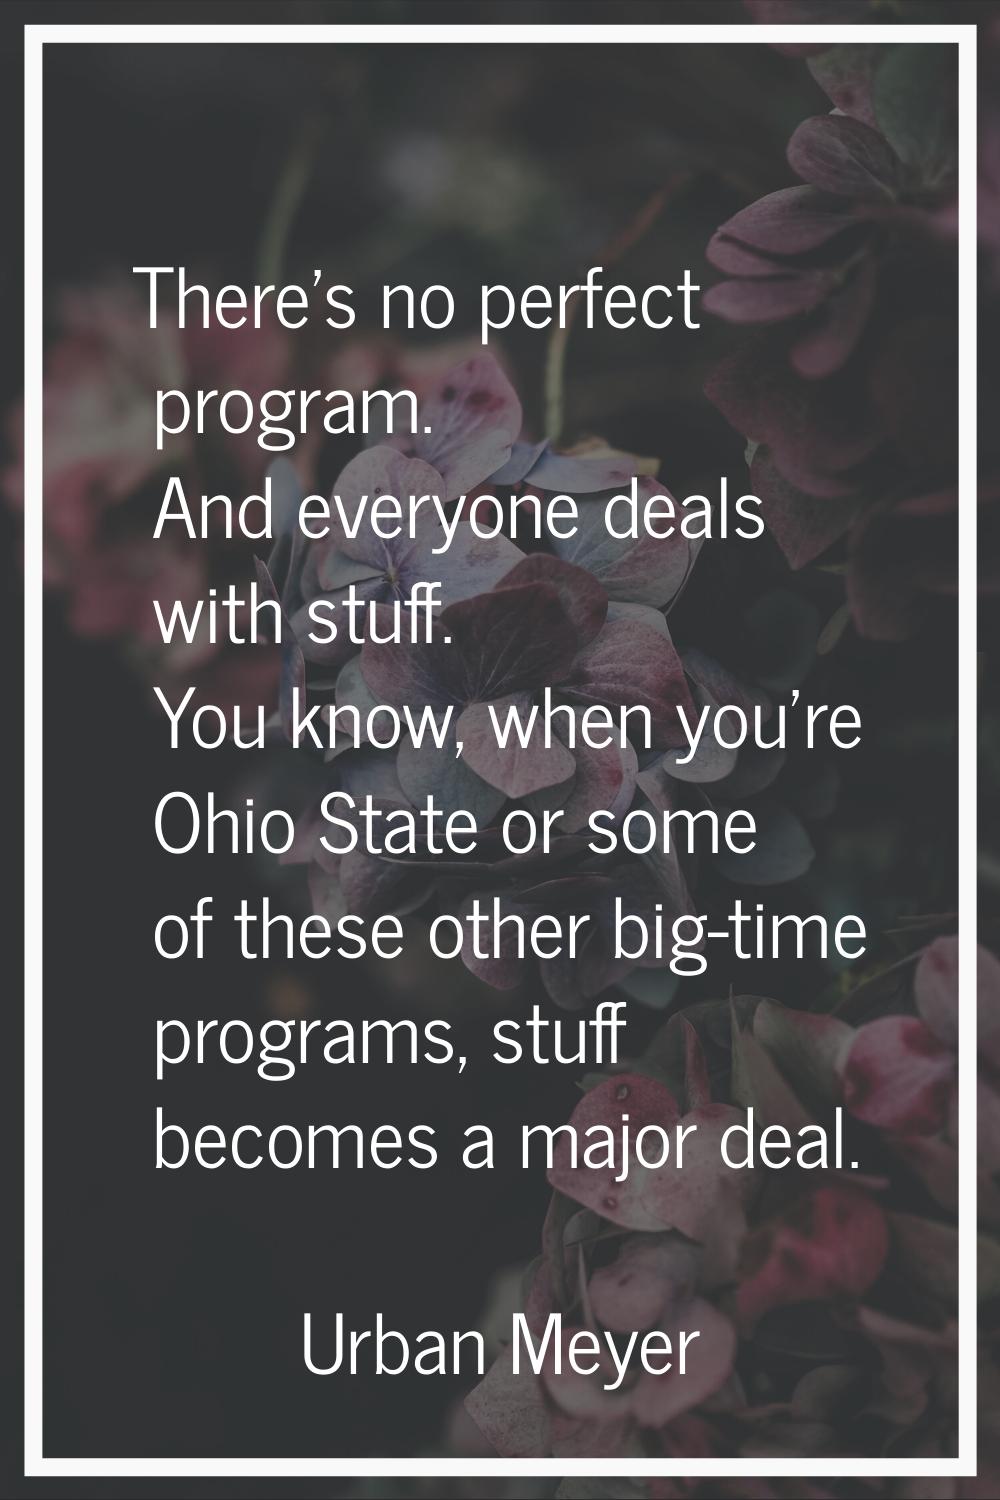 There's no perfect program. And everyone deals with stuff. You know, when you're Ohio State or some